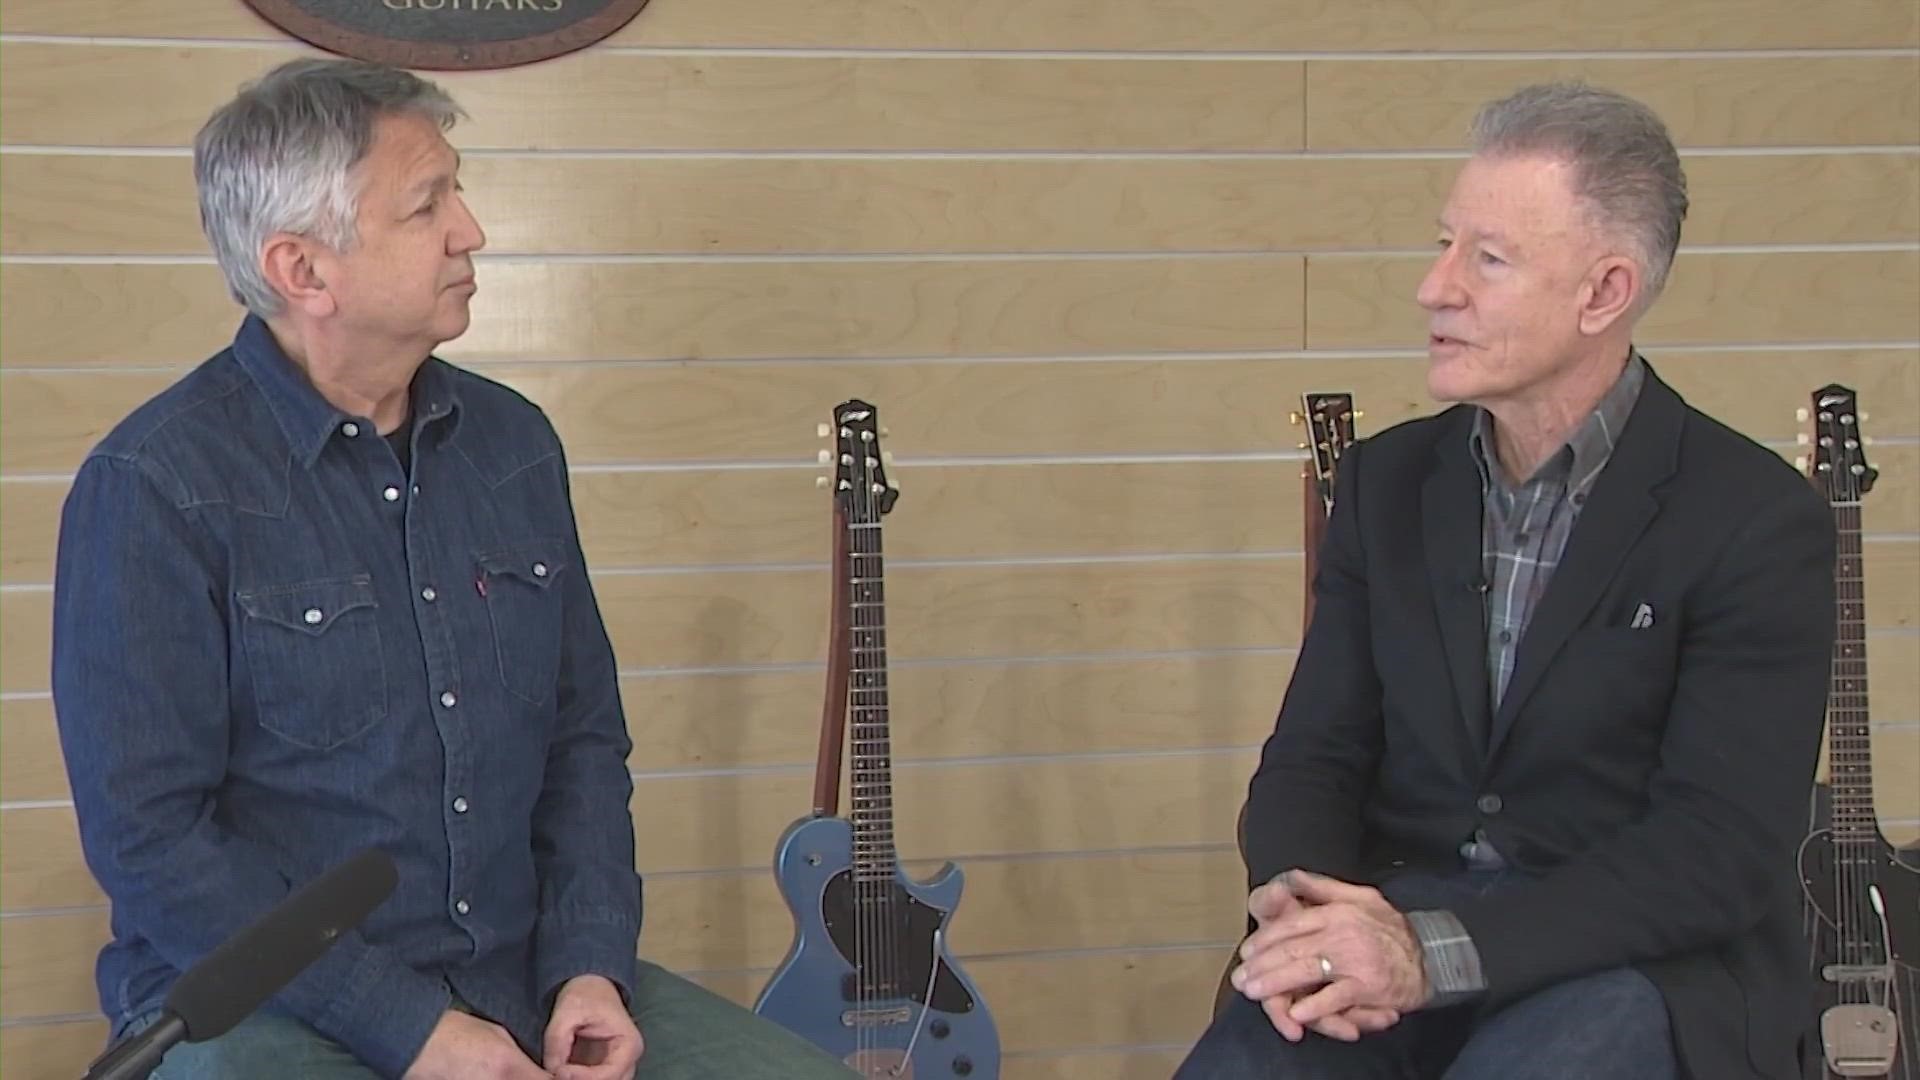 Lyle Lovett, who is from Klein, is nominated for a Grammy for his collaboration with Asleep at the Wheel.